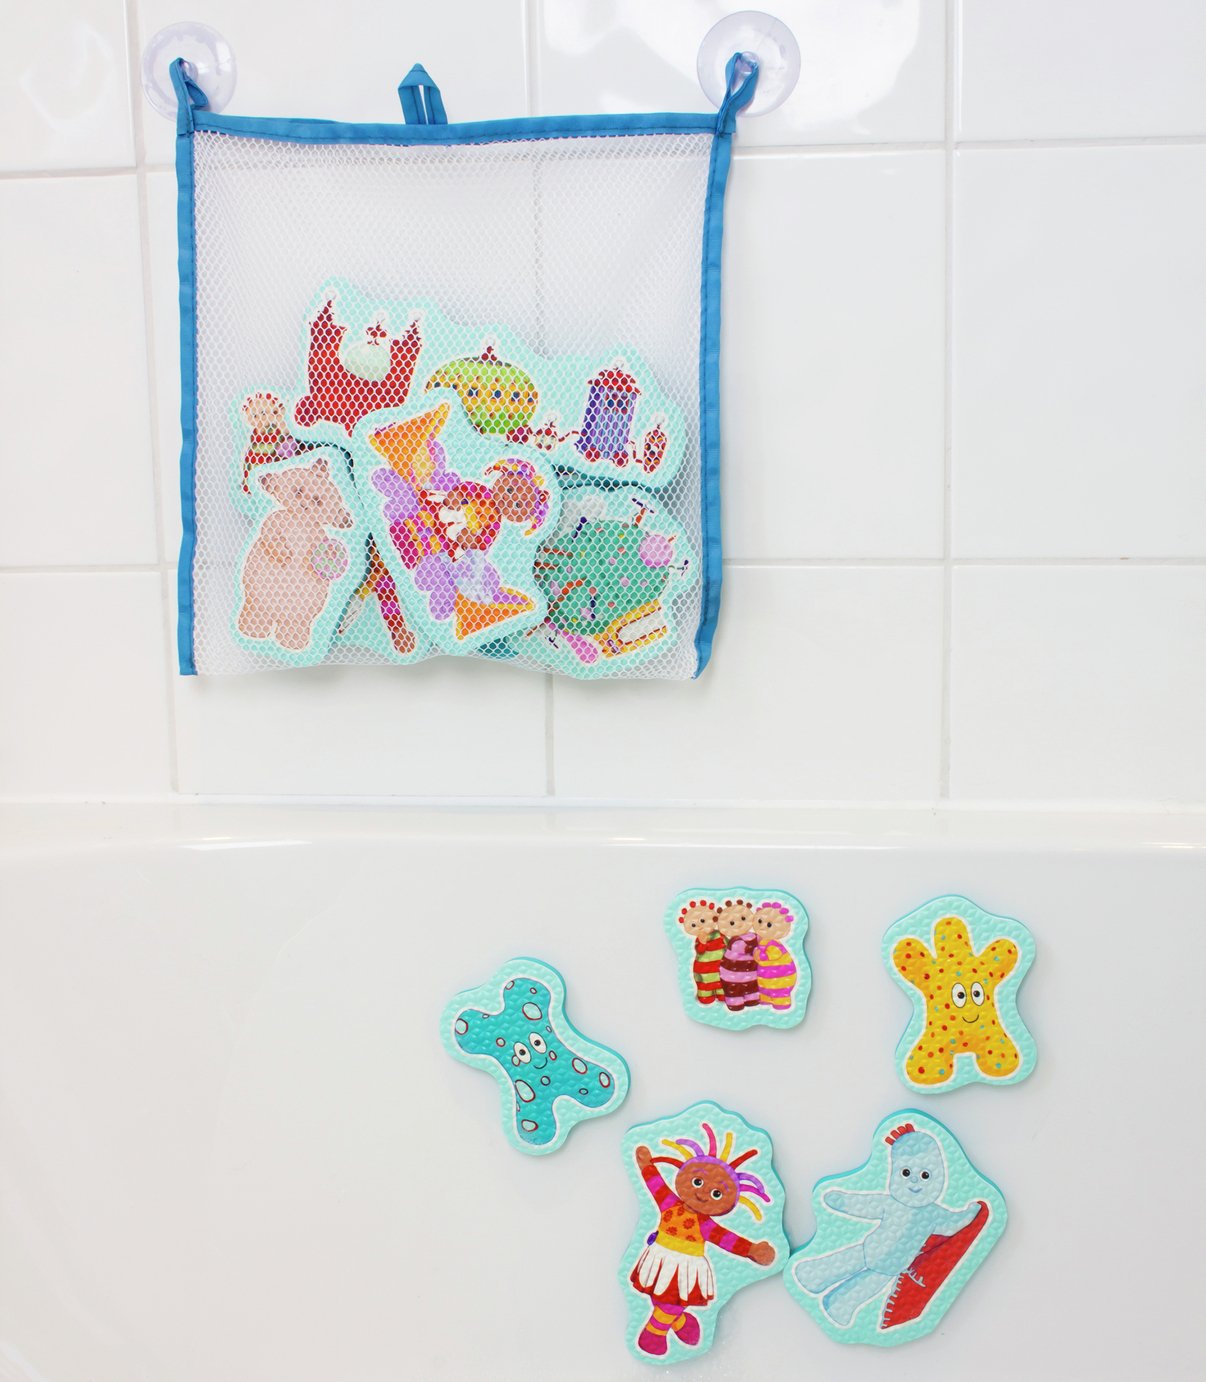 In The Night Garden Bath Set and Wooden Puzzle Bundle Review